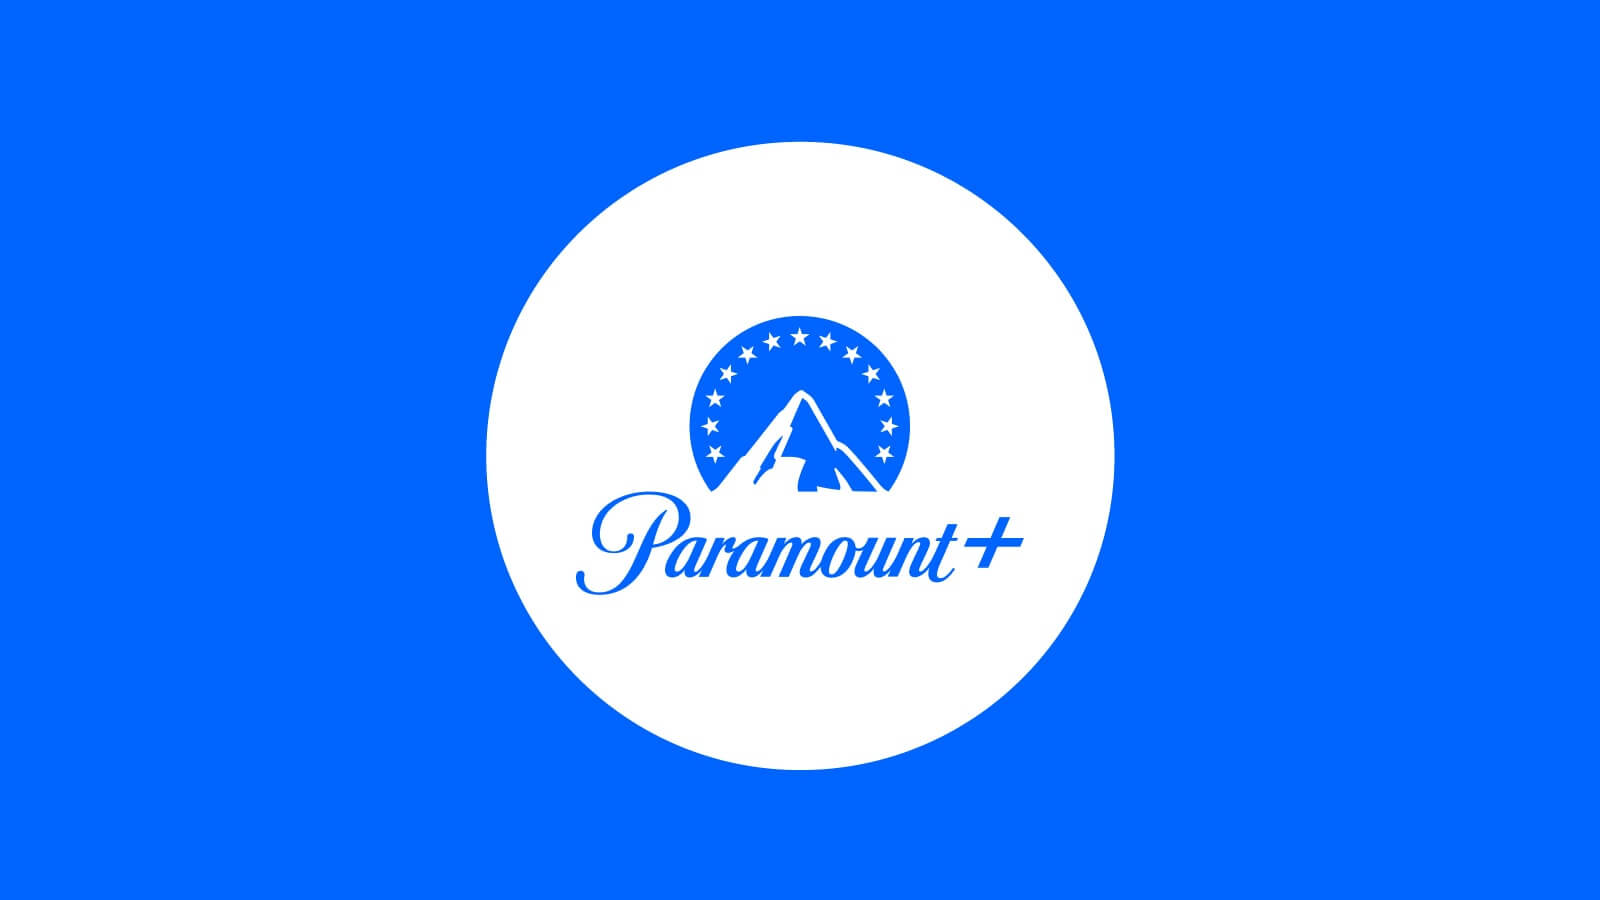 How to Get Paramount Plus Student Discount (25% Off)